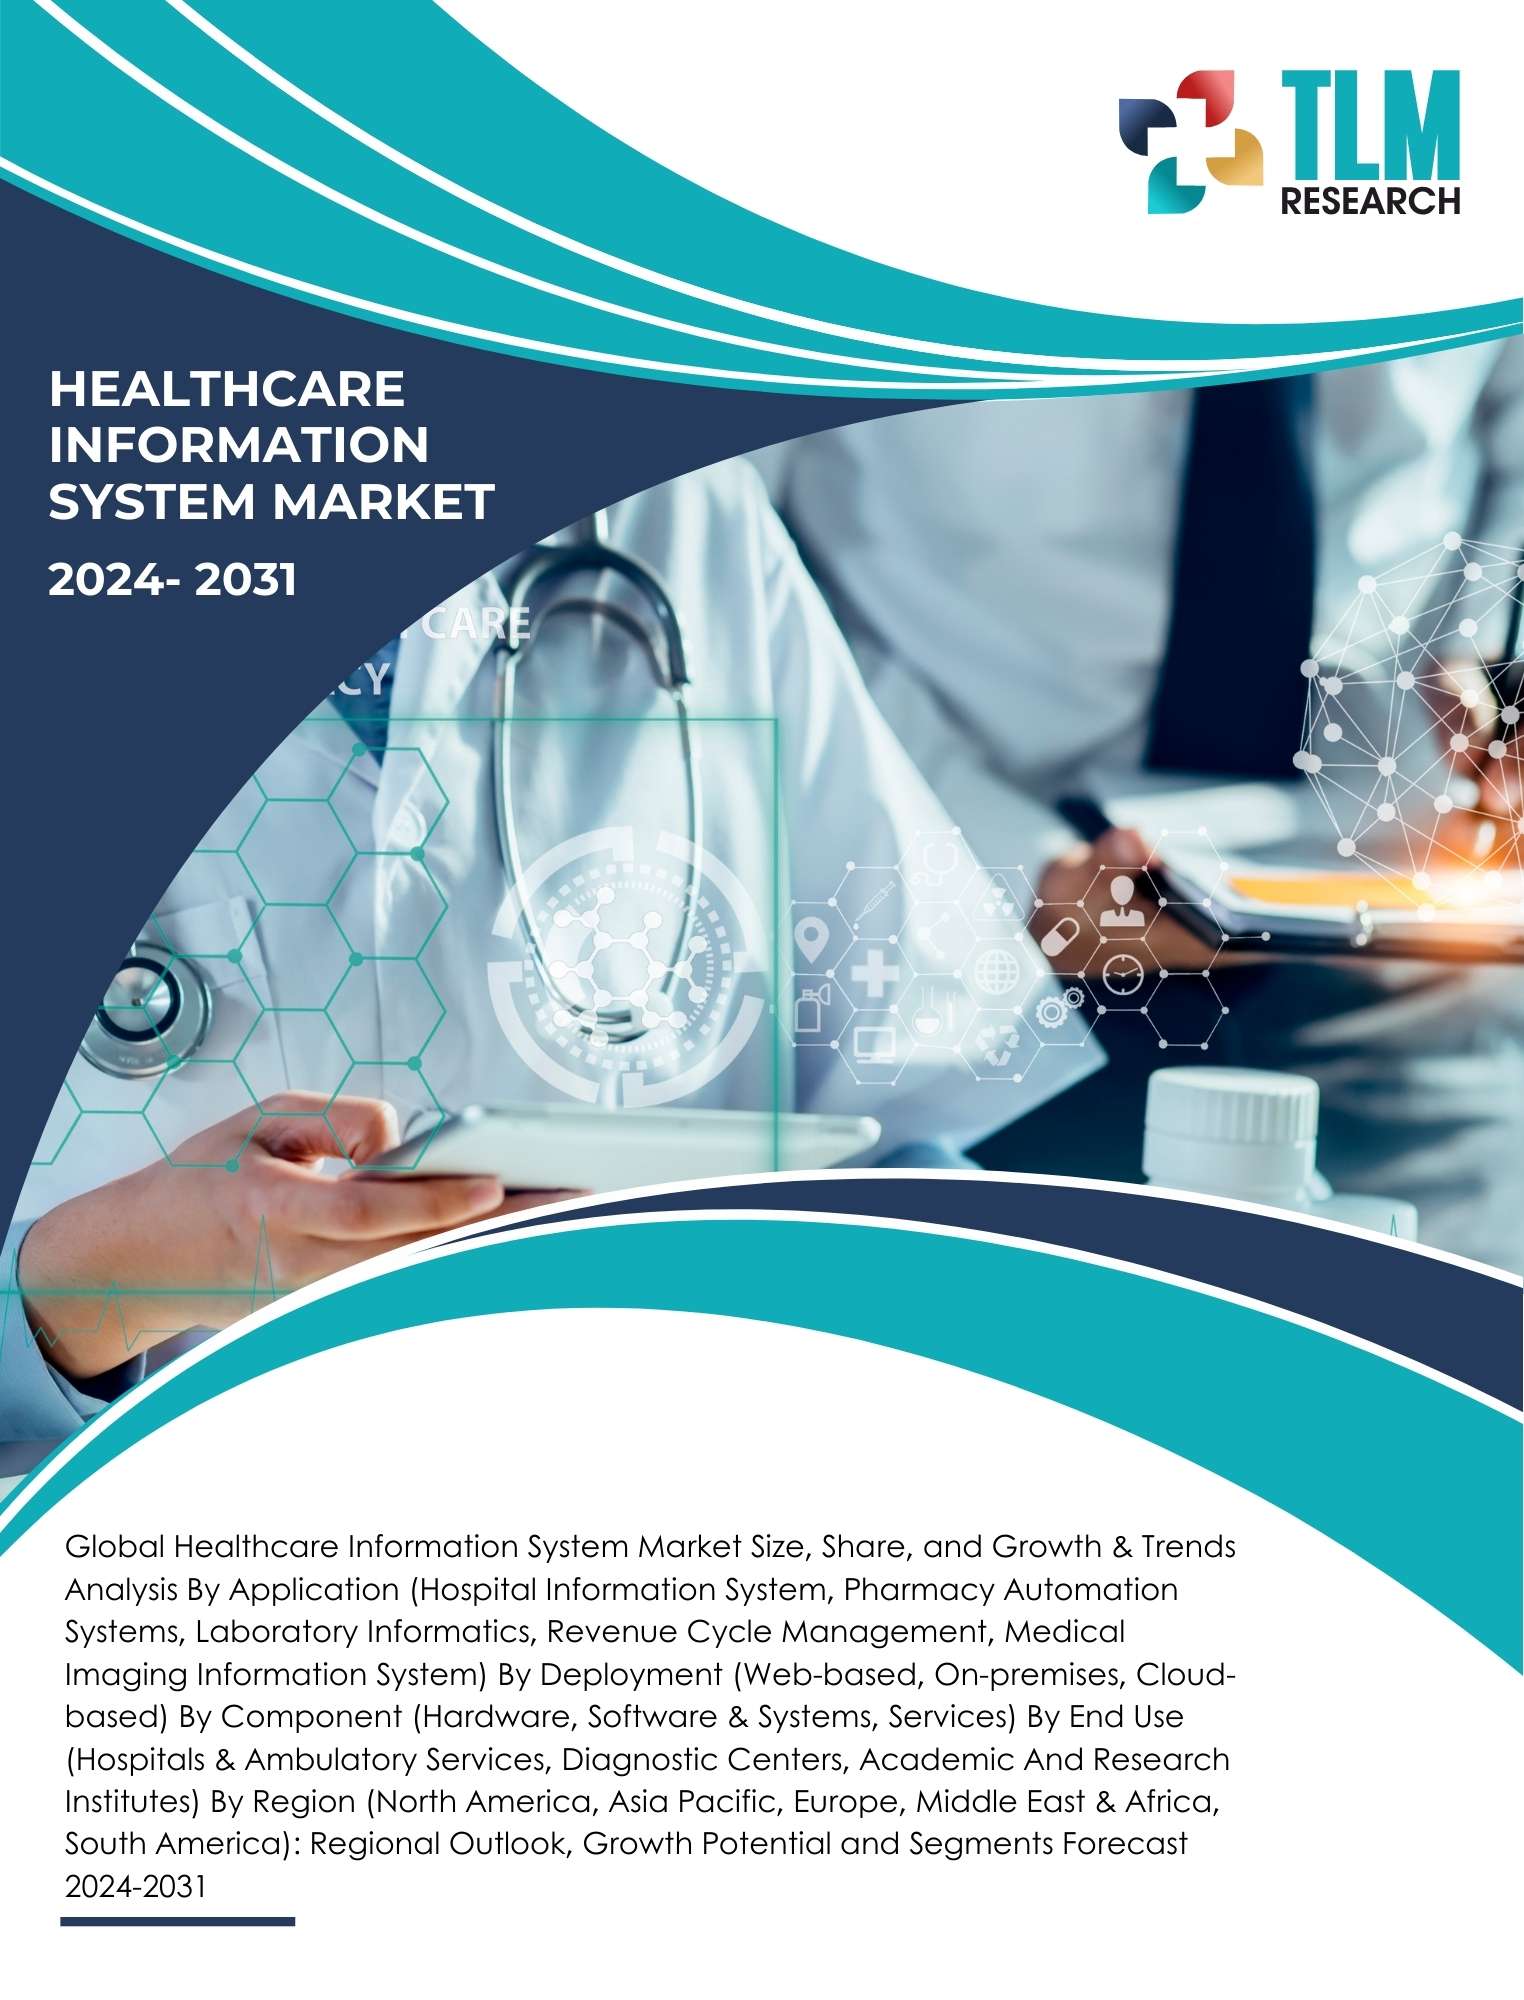 Global Healthcare Information System Market Growth & Trends Analysis By Application | TLM Research